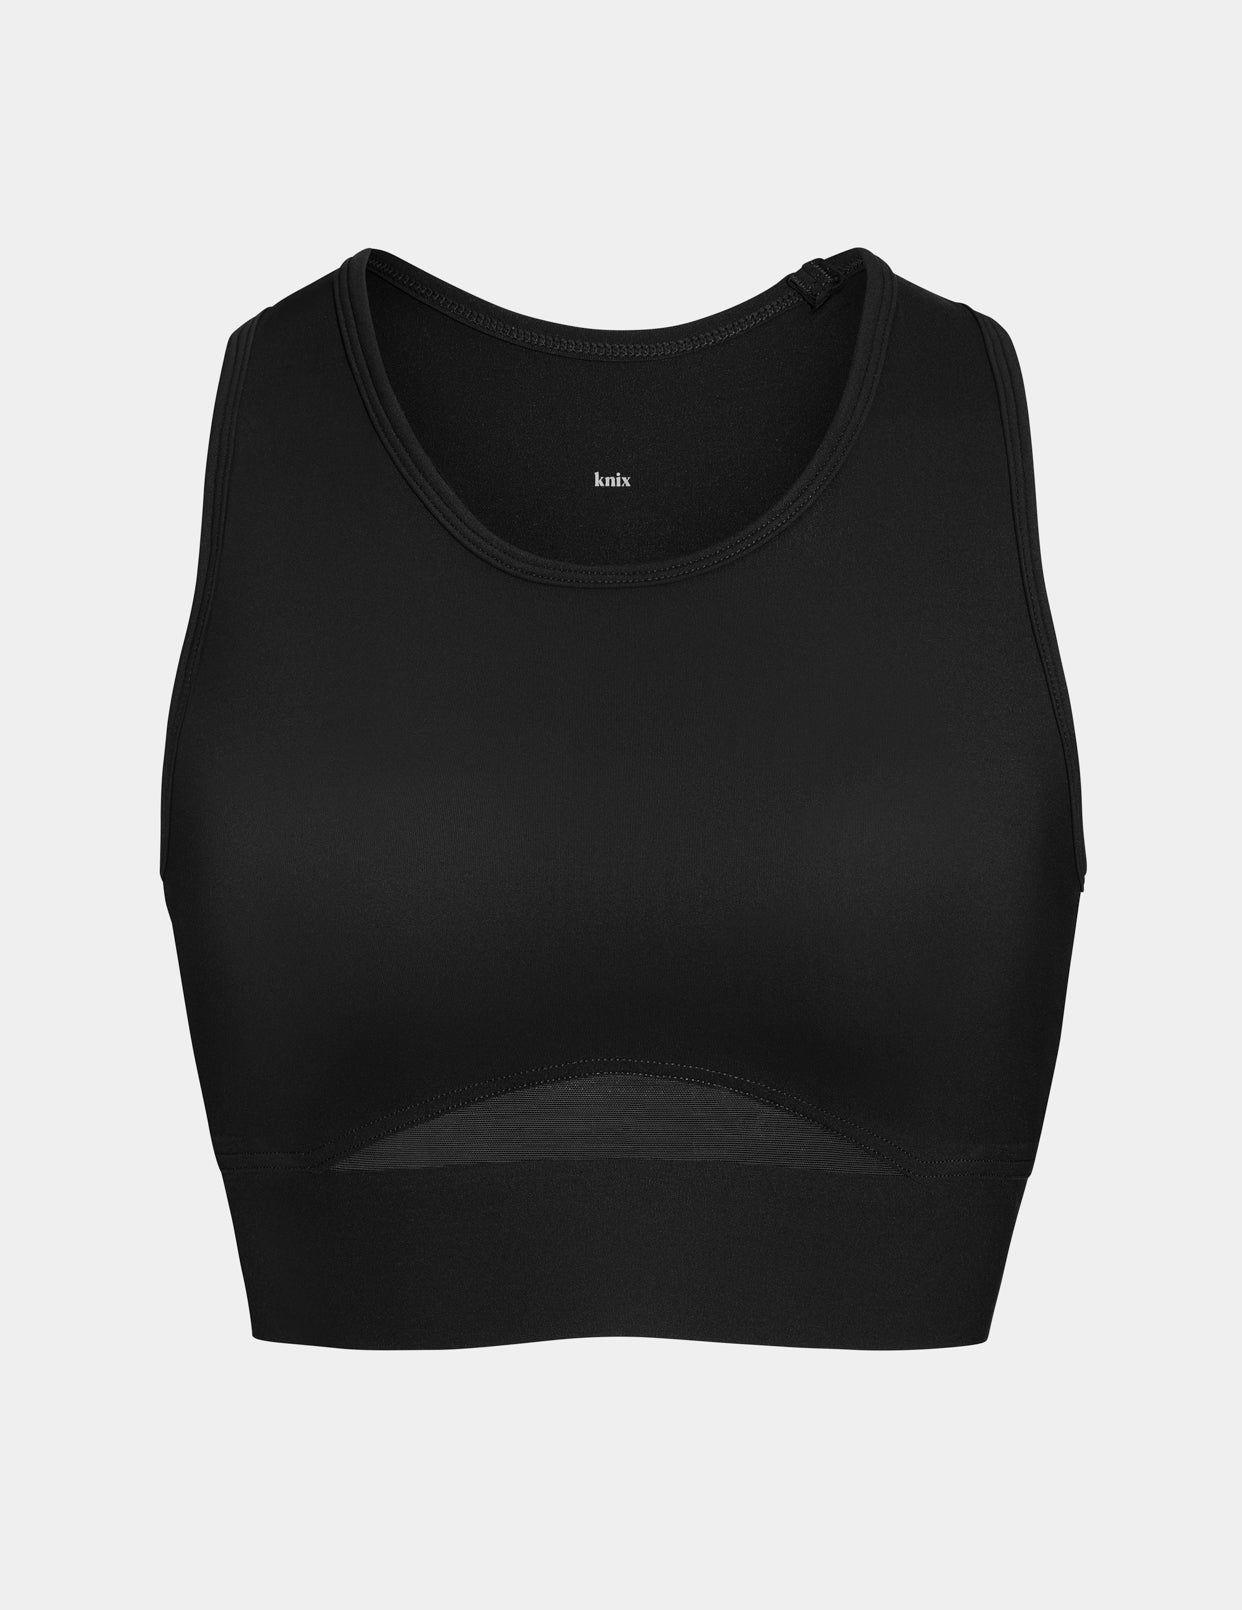 An Everyday Bra: Knix LuxeLift Pullover Bra, Curious About Knix Sports Bras?  We've Broken Down the 6 Styles